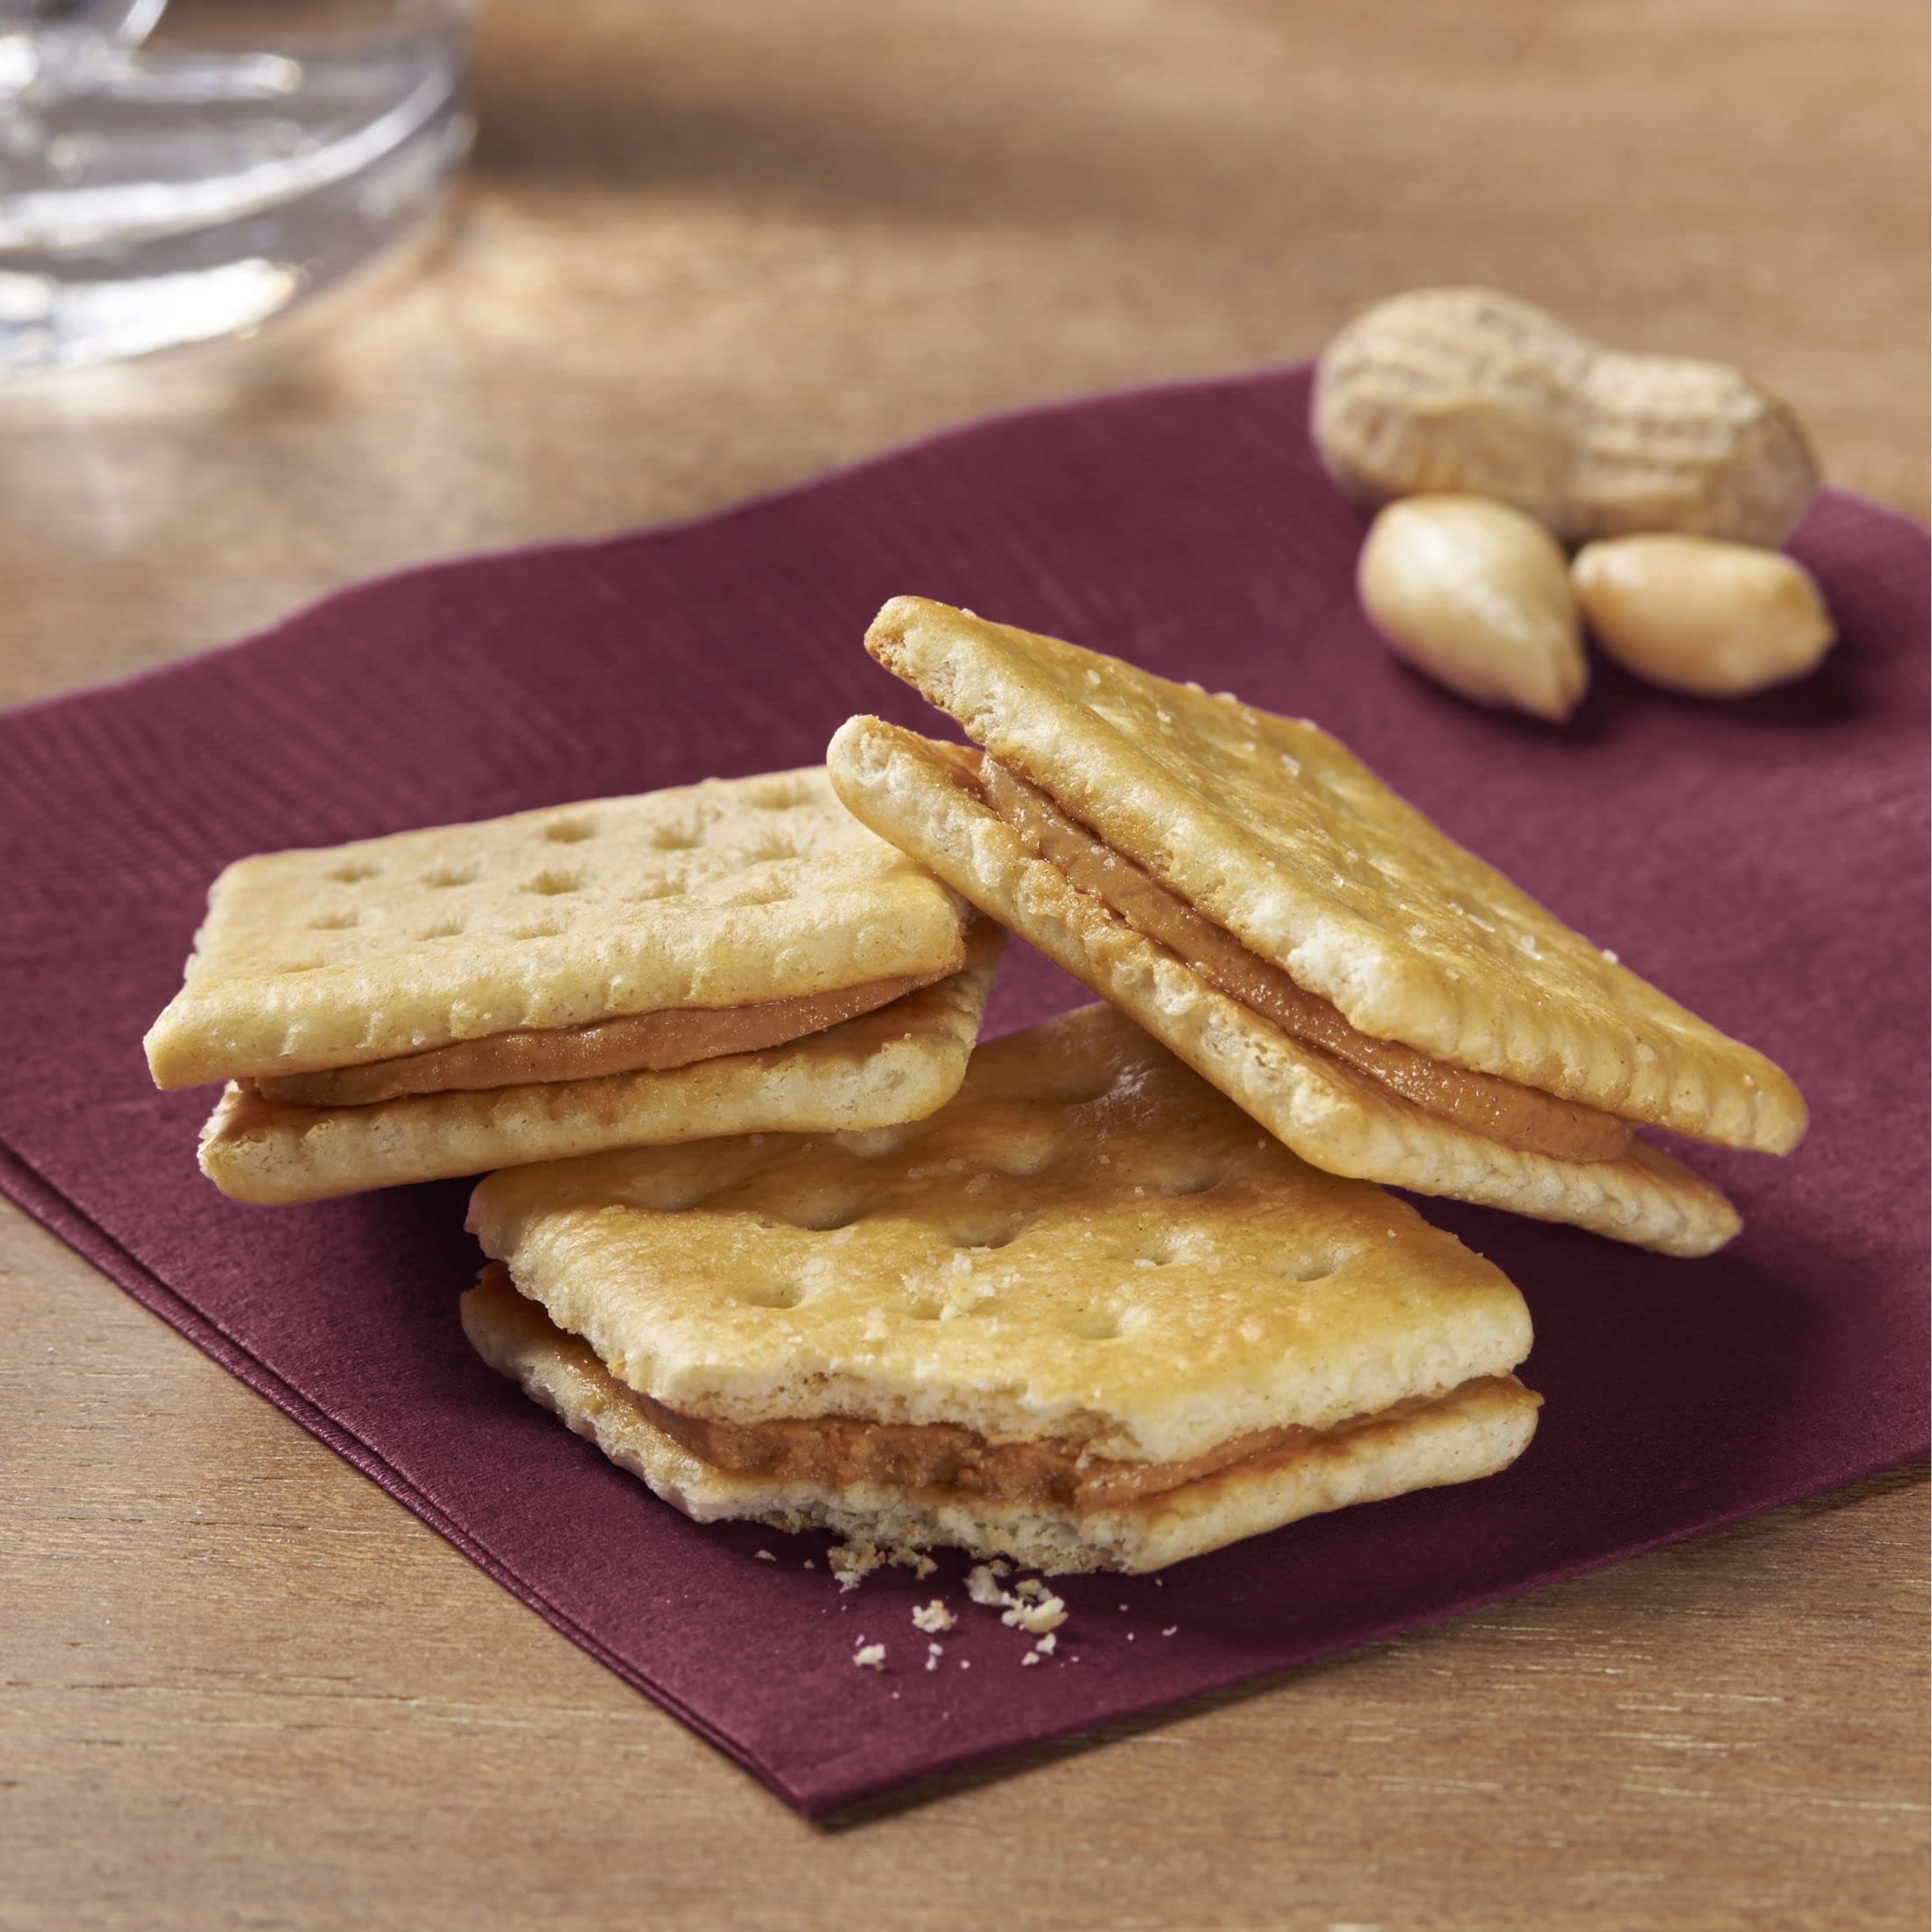 Keebler Toast & Peanut Butter Sandwich Crackers, (Pack of 4) - image 5 of 8